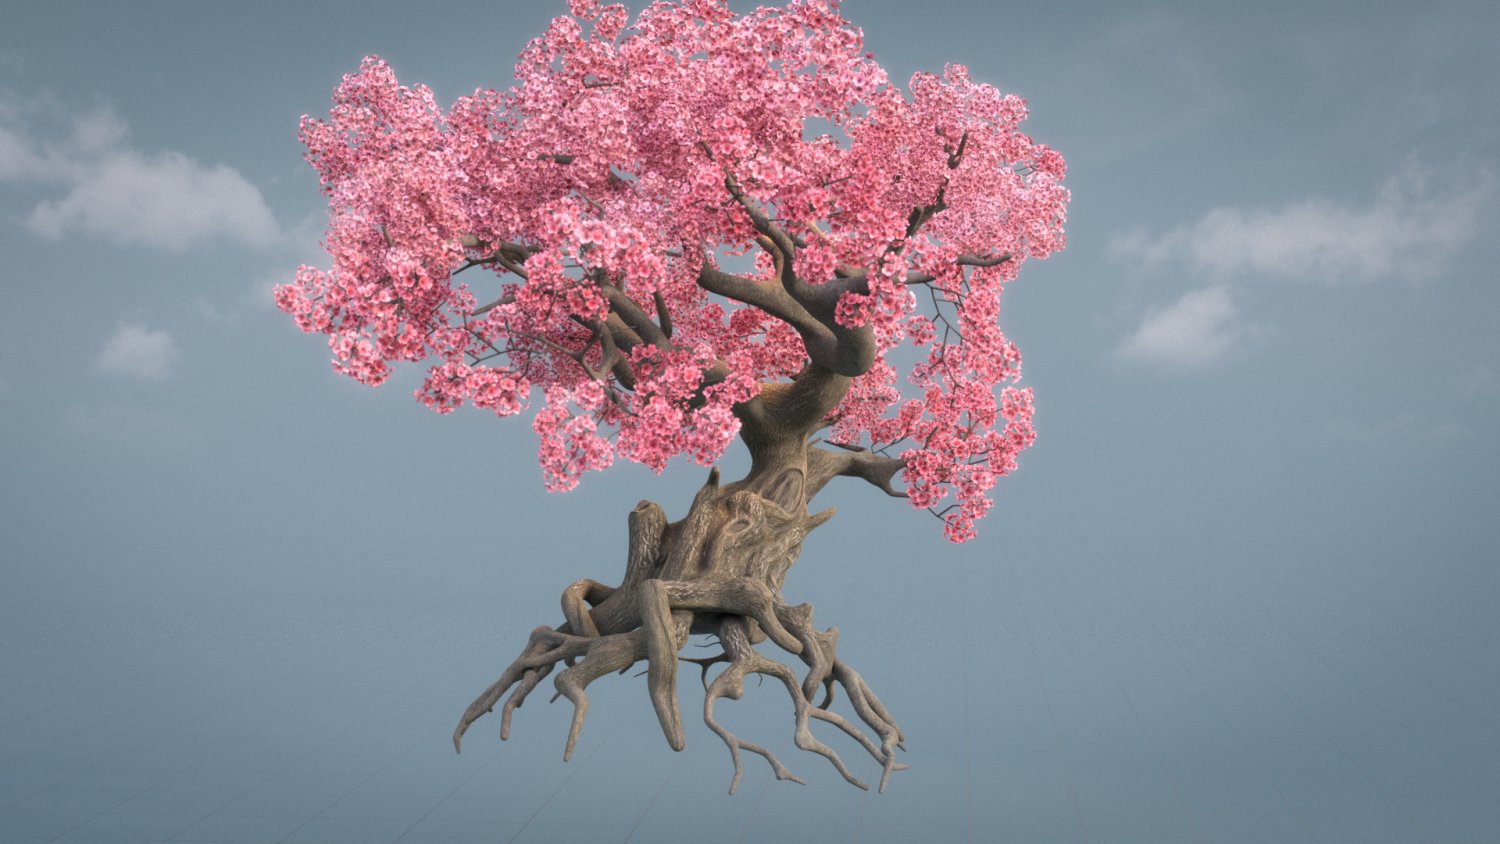 1,397,168 Cherry Blossom Images, Stock Photos, 3D objects